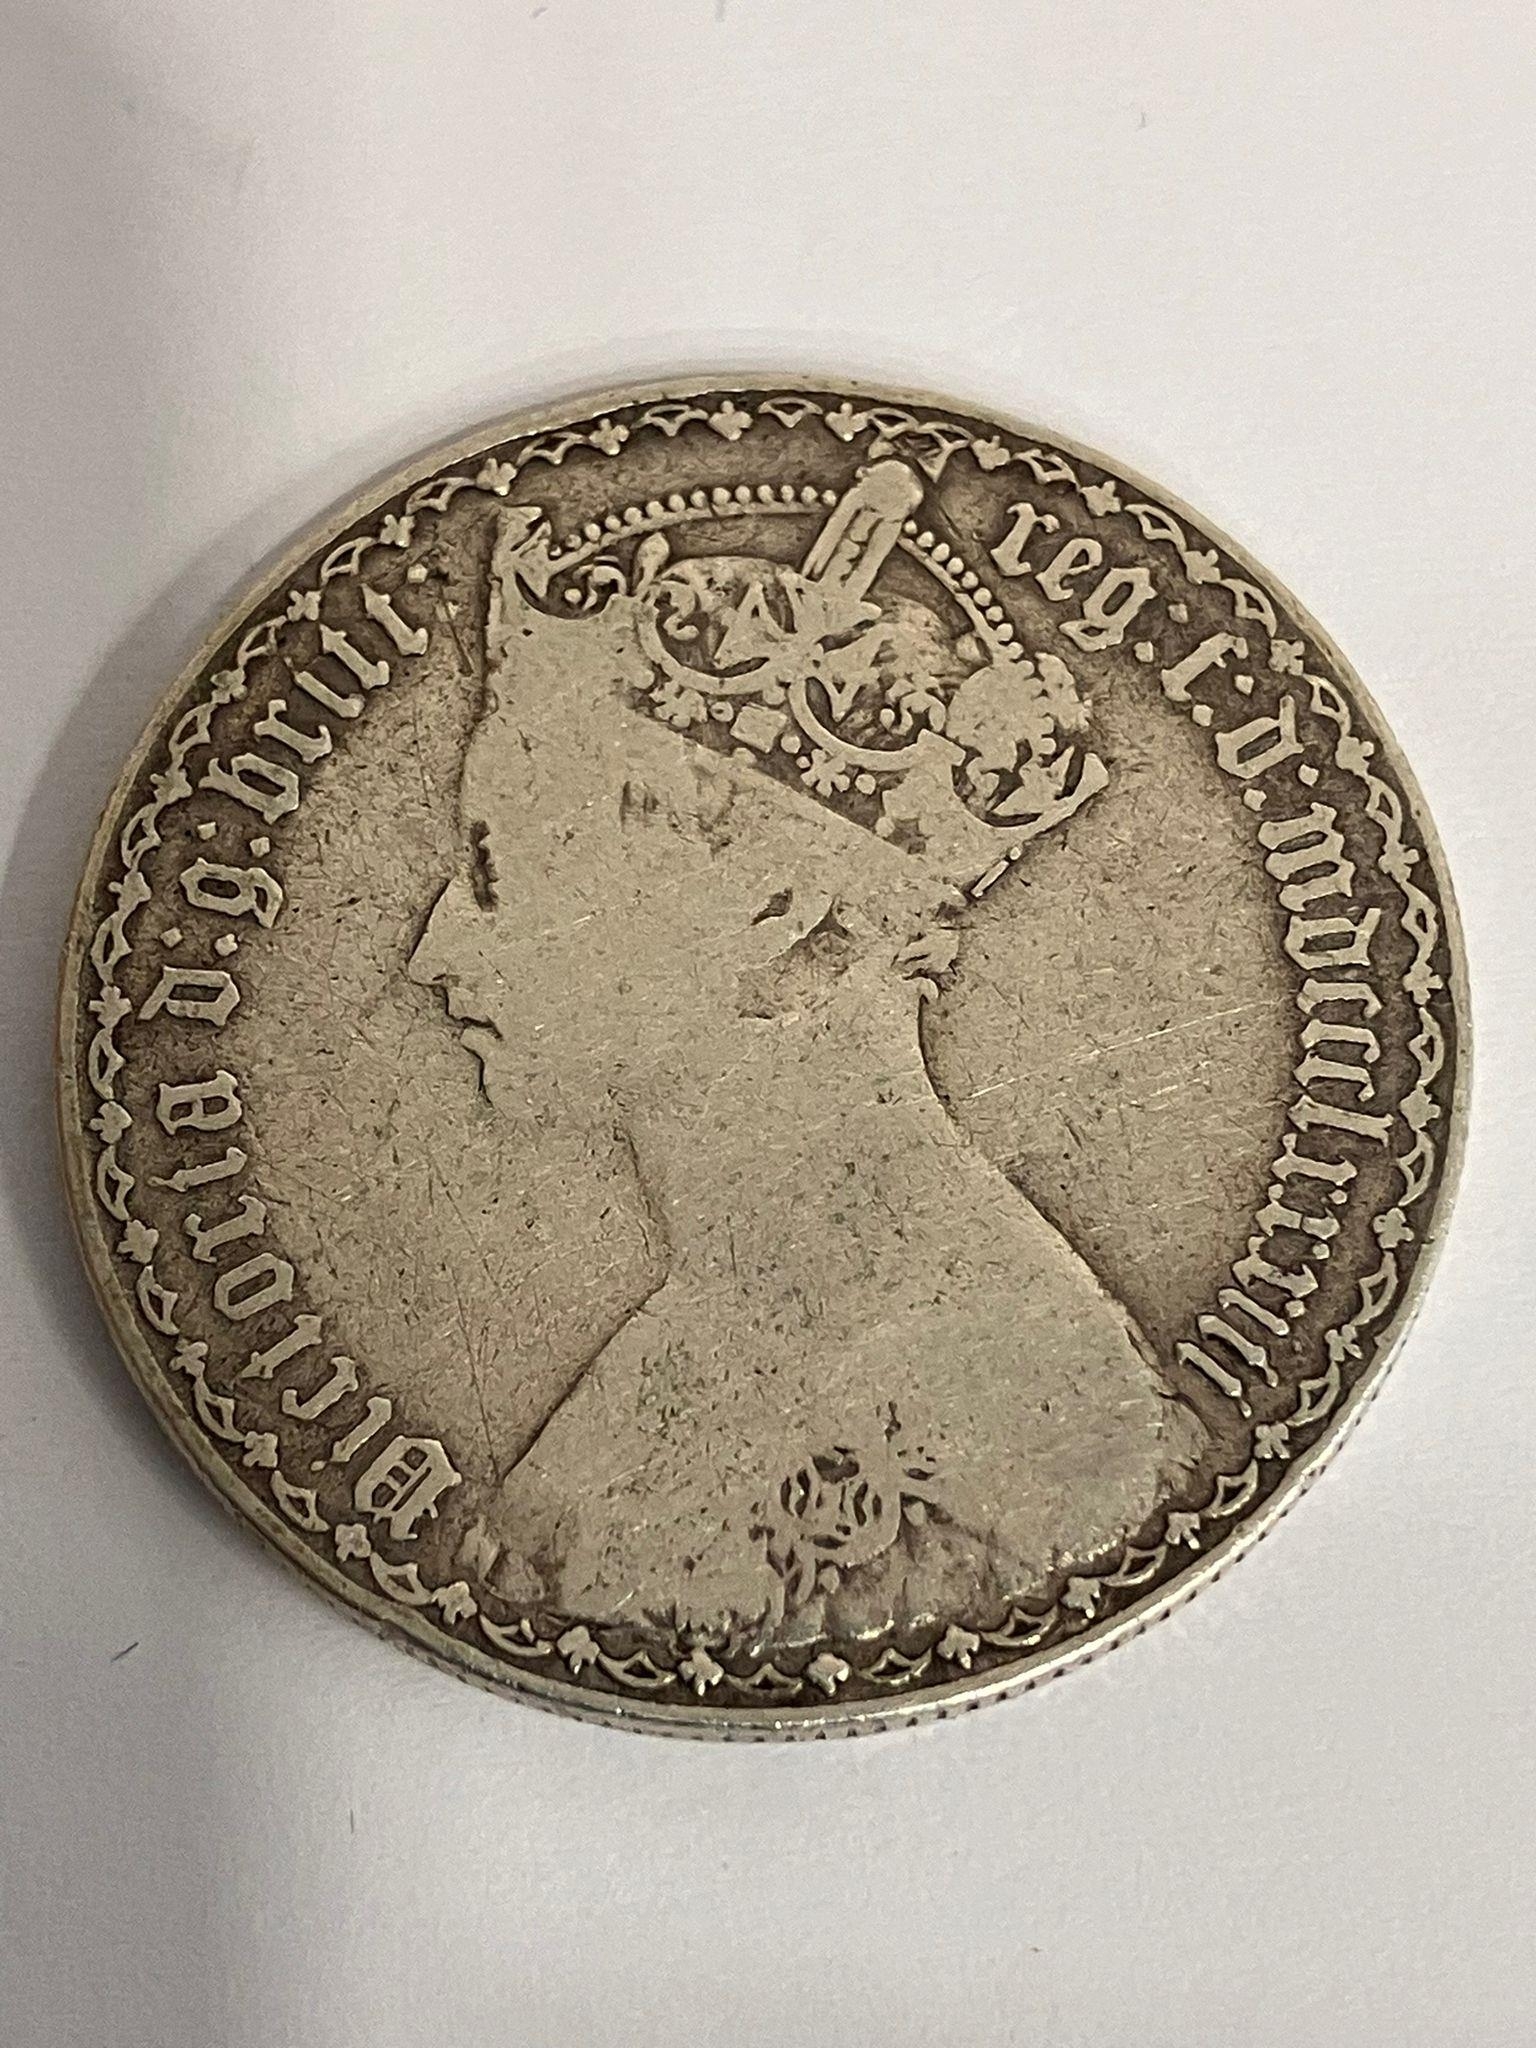 1883 SILVER GOTHIC FLORIN. Fine/Very Fine condition. - Image 2 of 3